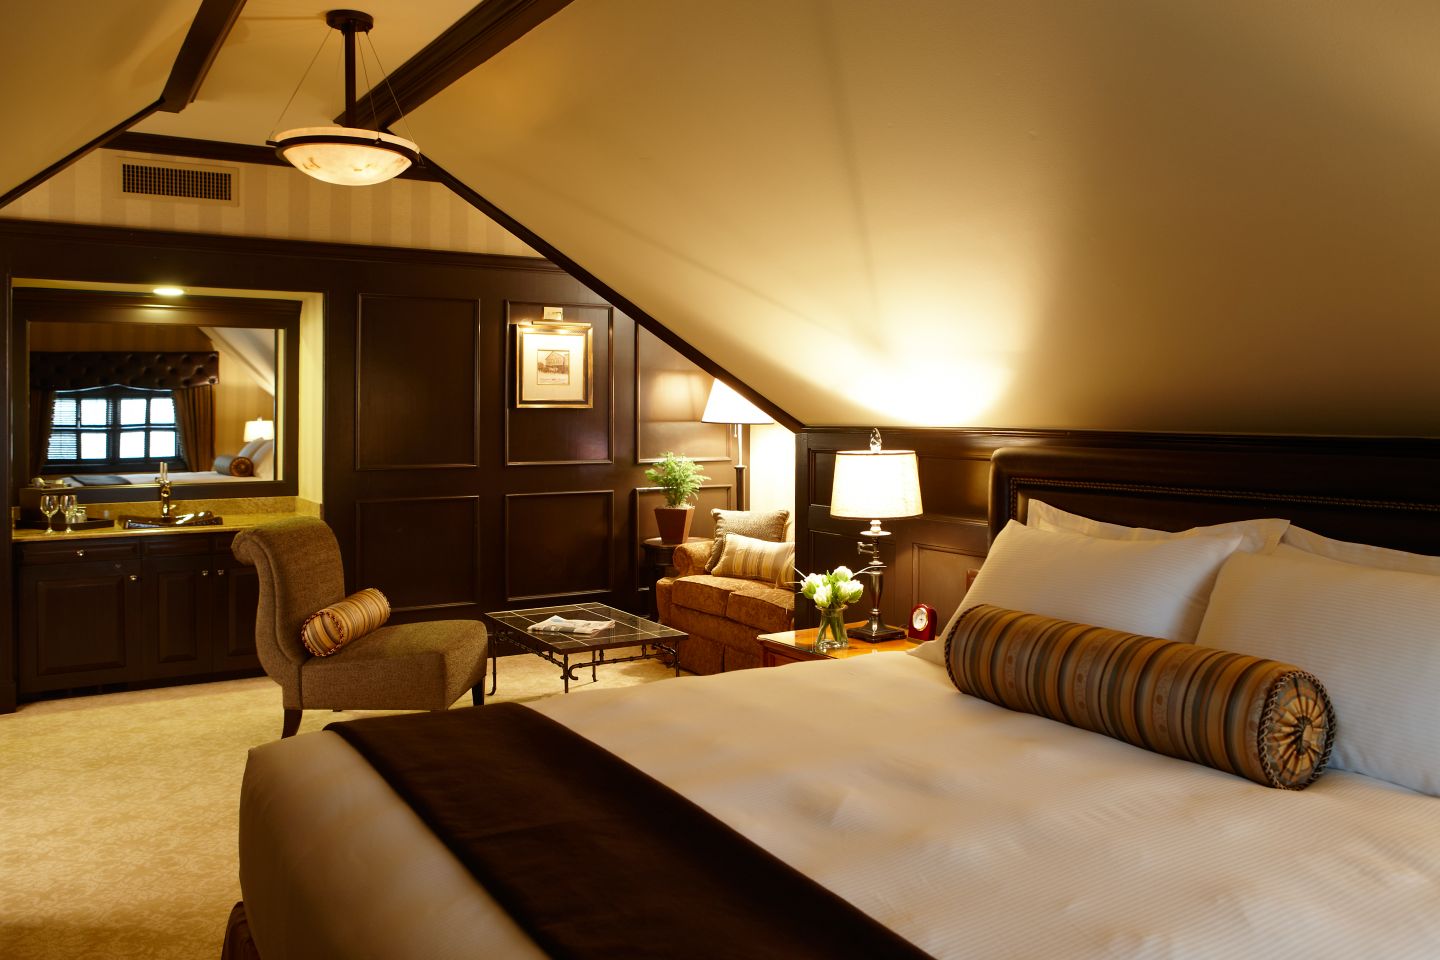 This is the Deluxe Room at the Carriage House